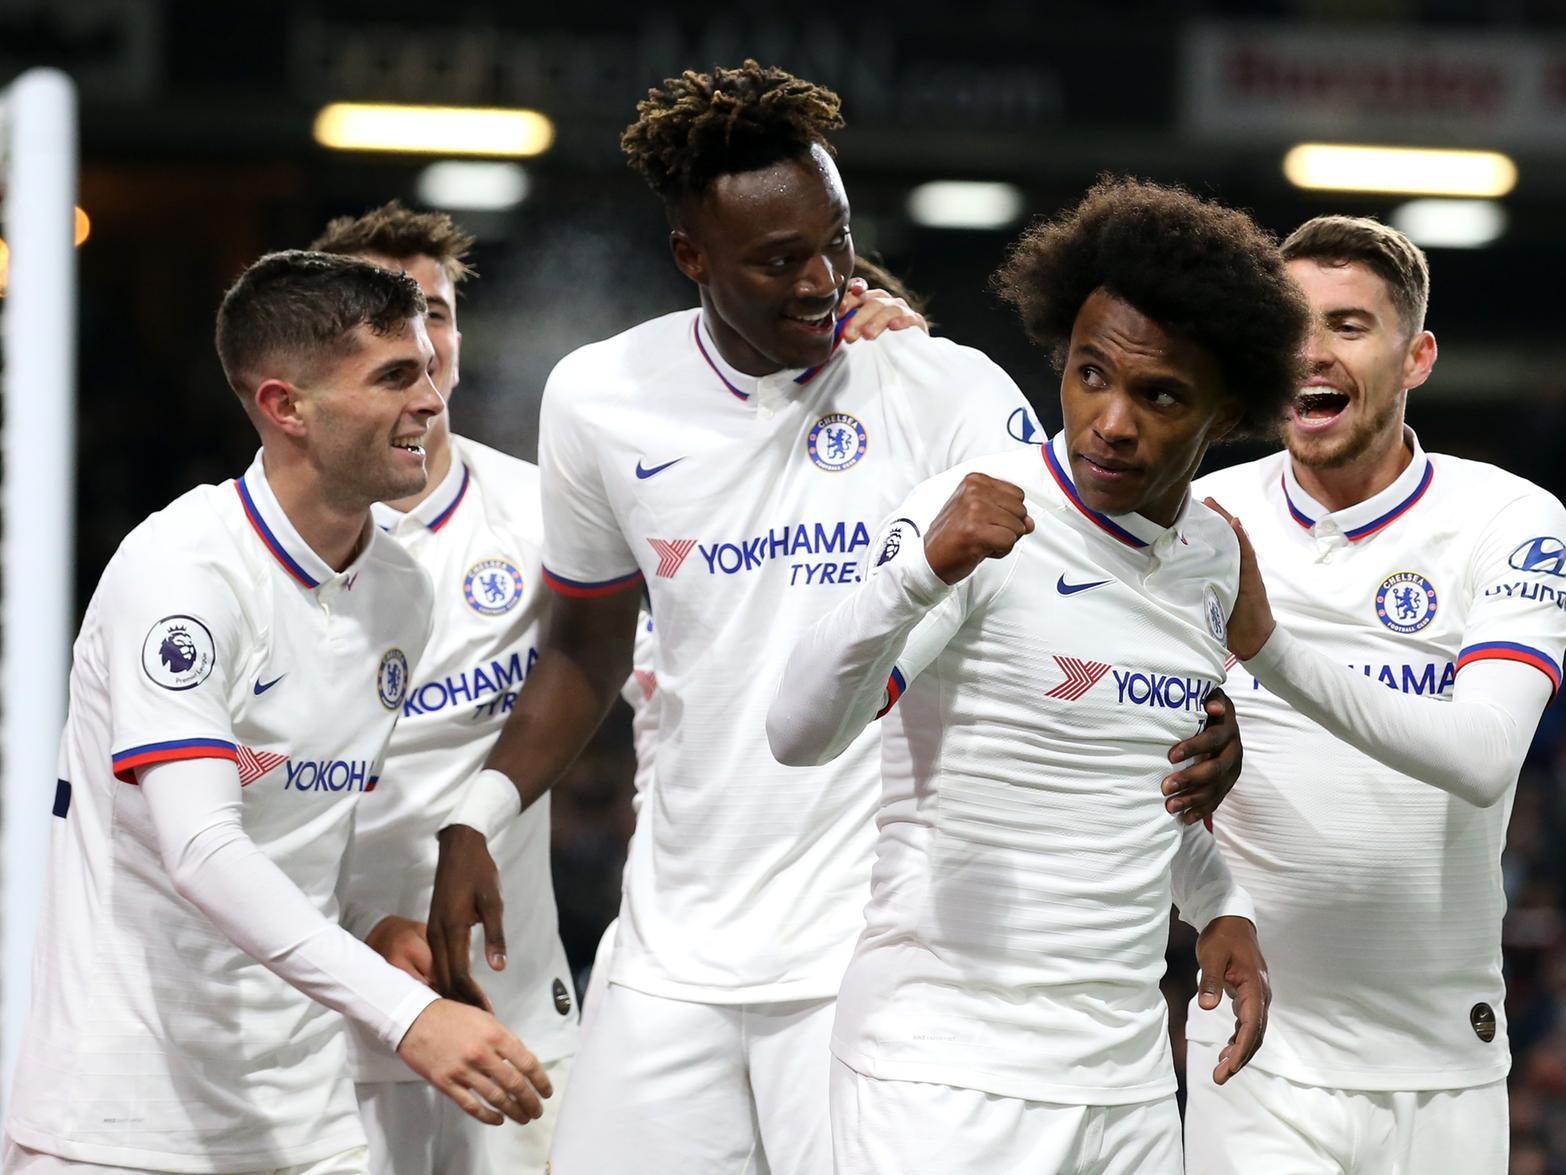 Chelsea have been simply fantastic on the road this season, but they'll face a massive test against a wounded Man City this weekend. Last season this game ended 6-0, surely that can't happen again. Can it?